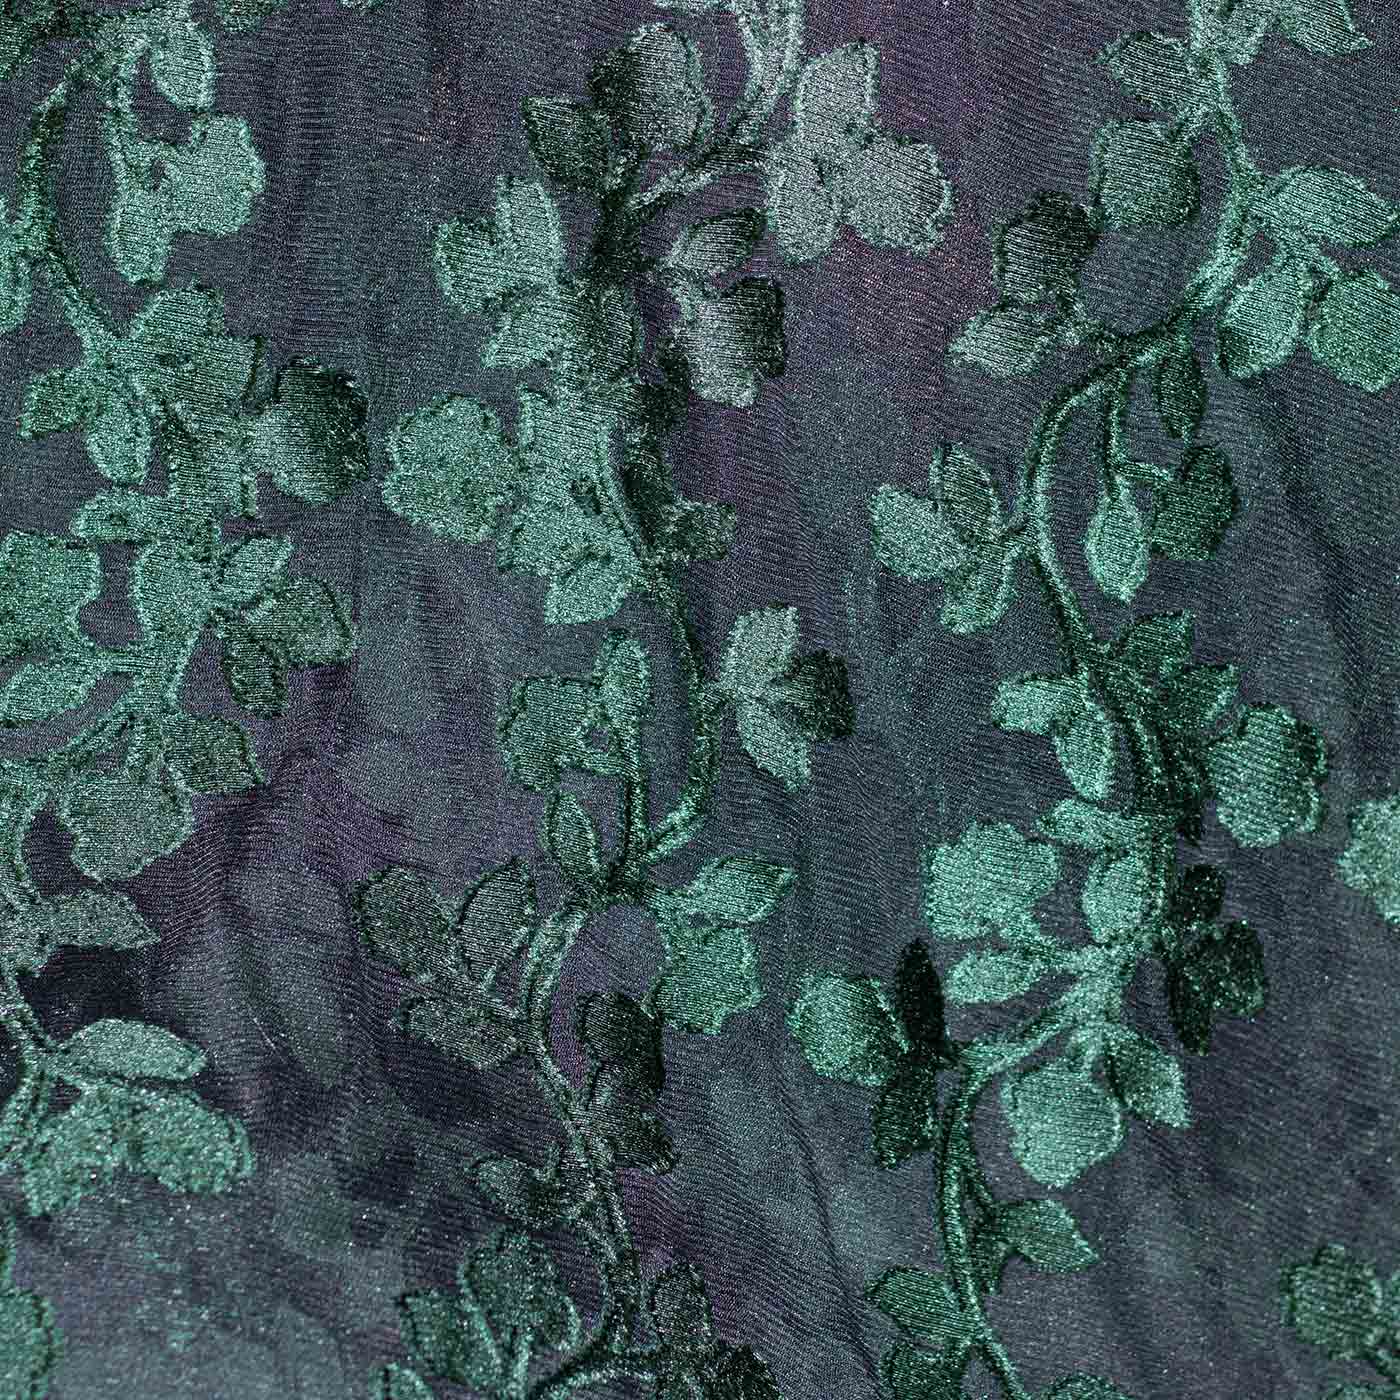 Green and Black High Quality Crushed Floral Velvet